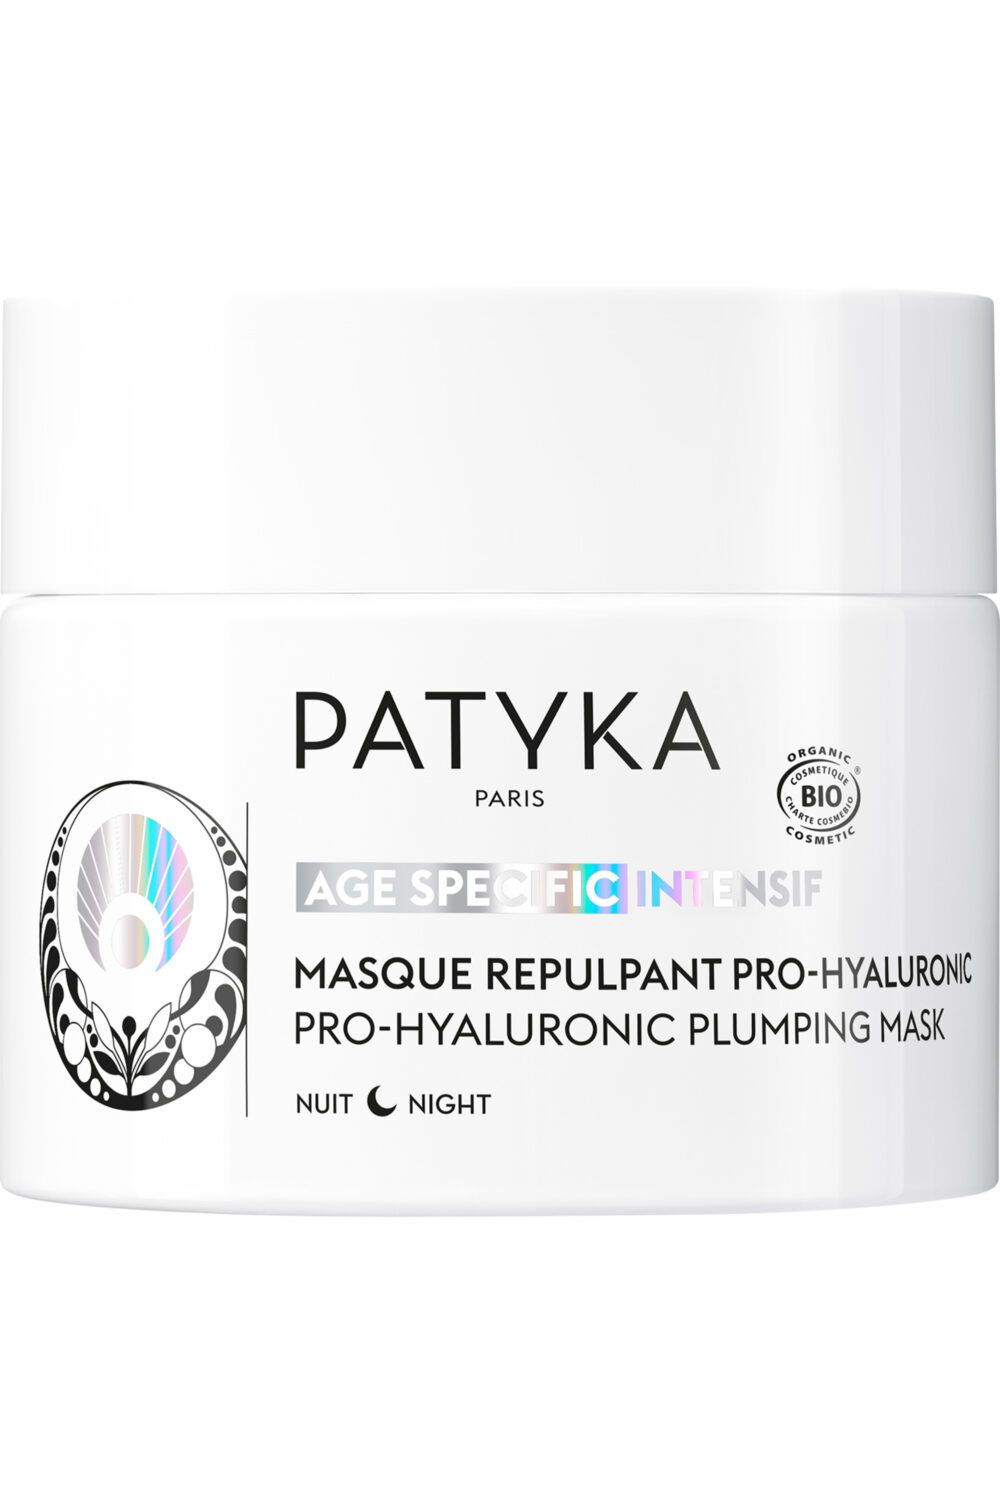 Patyka - Masque repulpant pro-hyaluronic rechargeable 50ml